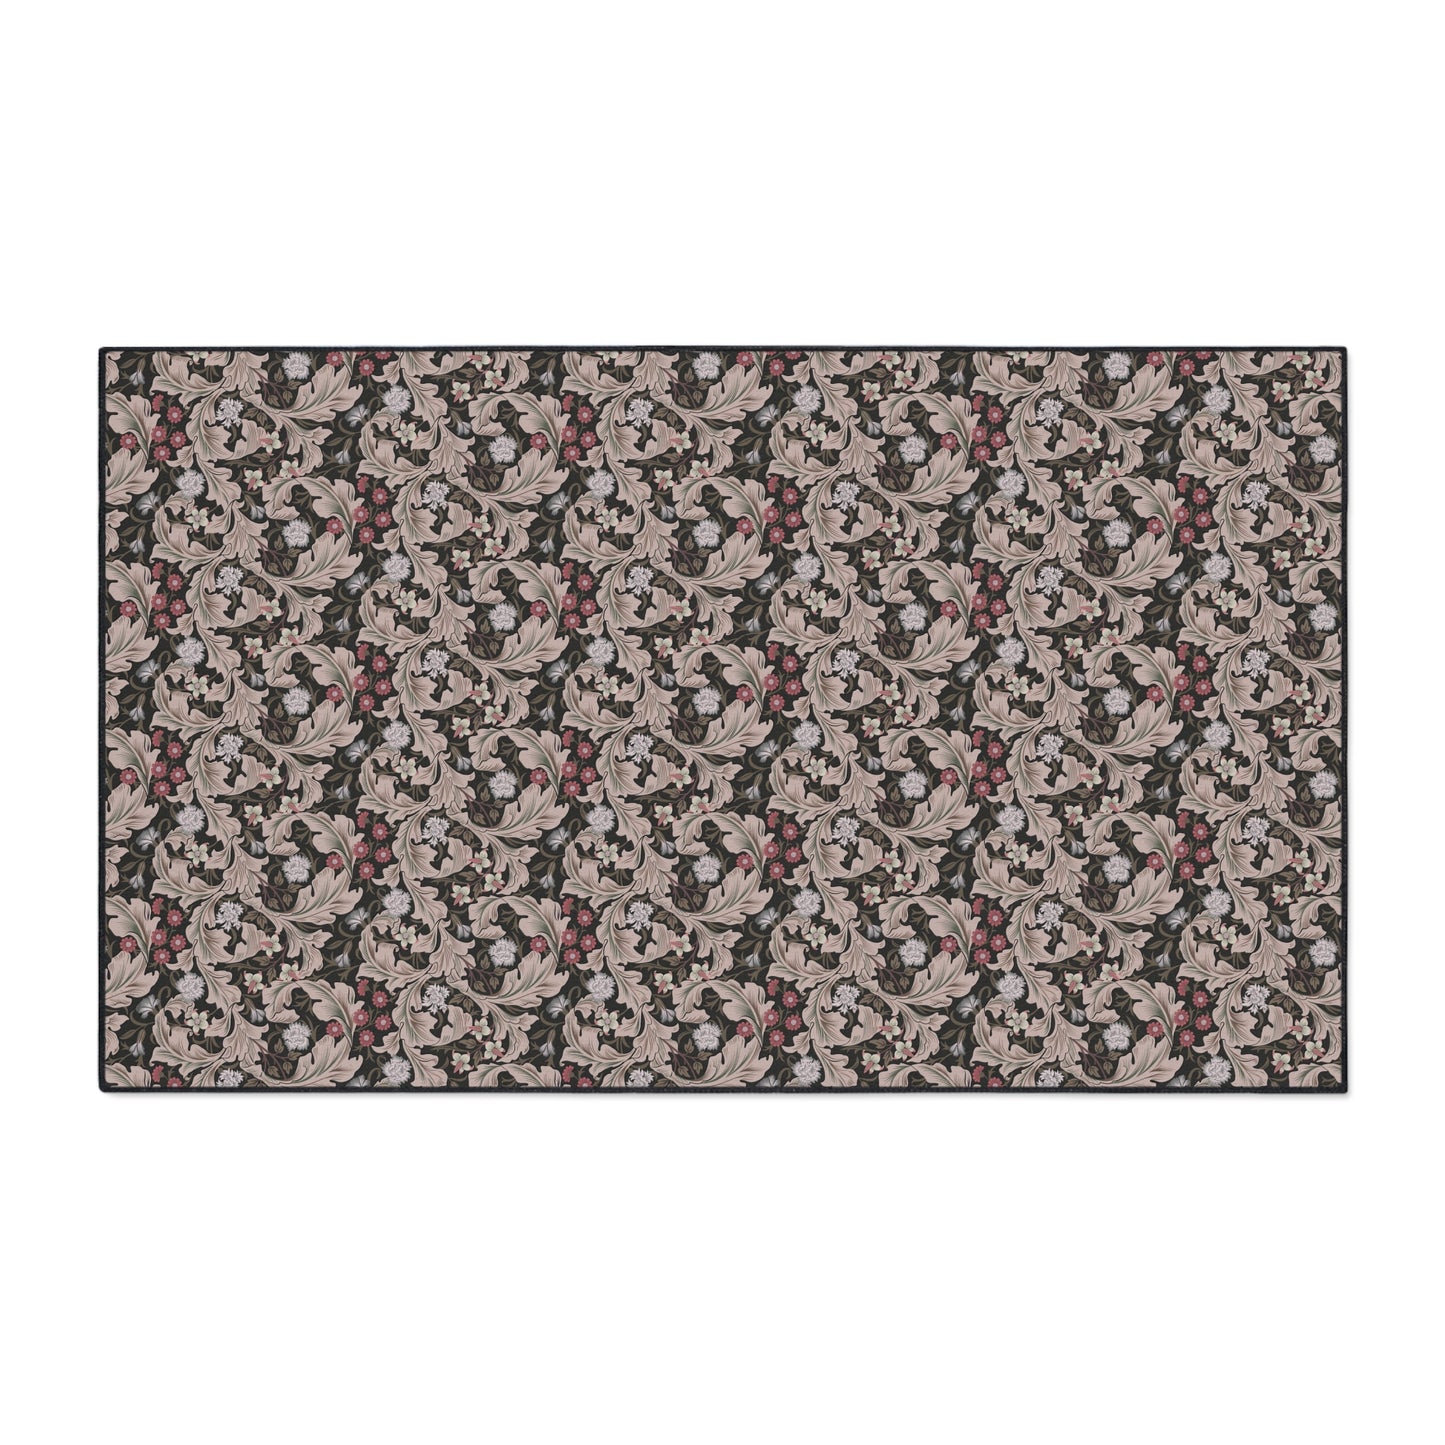 william-morris-co-heavy-duty-floor-mat-leicester-collection-mocha-4